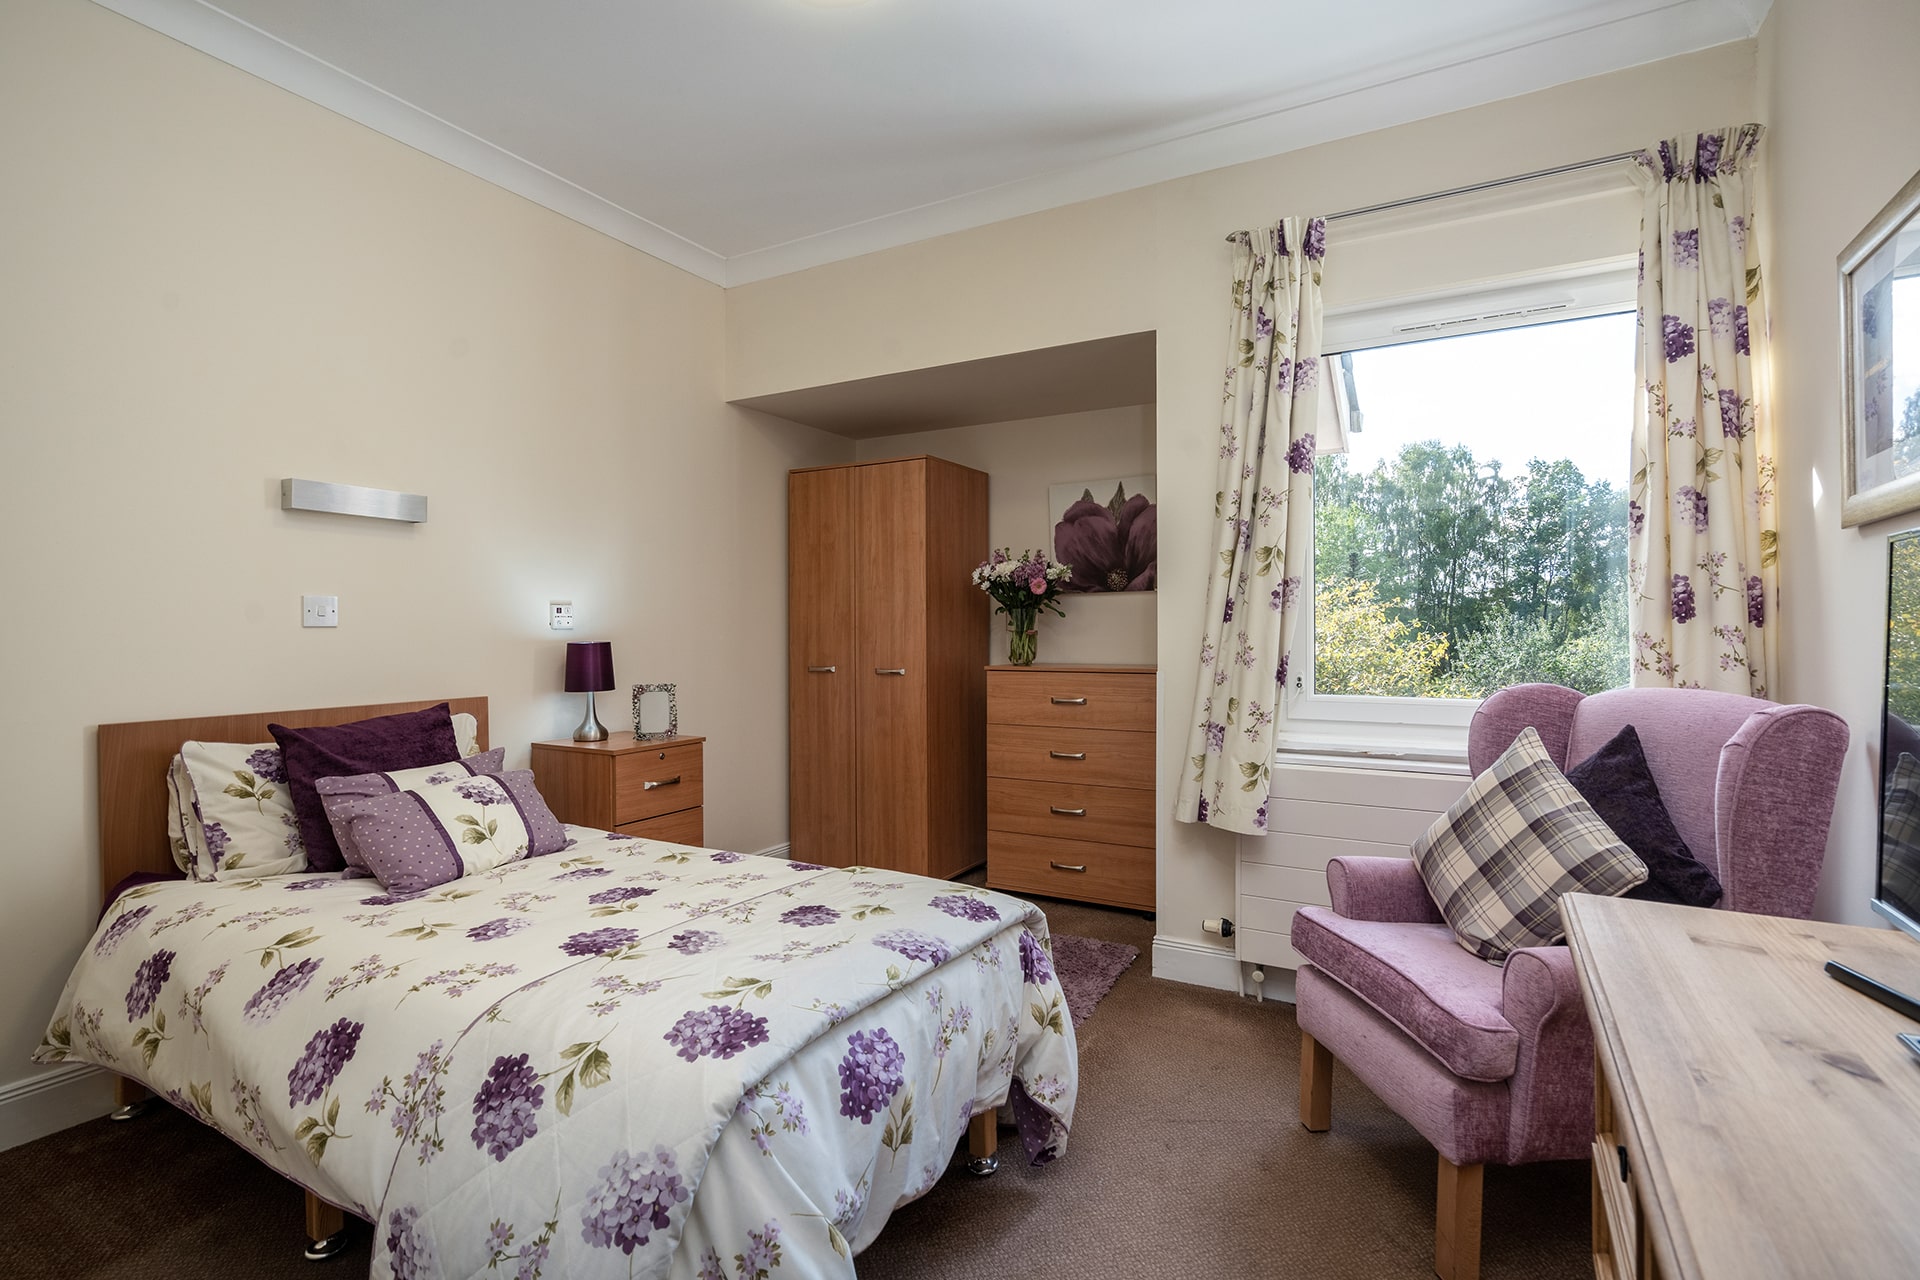 Tastefully decorated first floor bedroom at Muirton House Care Home with views of the garden.